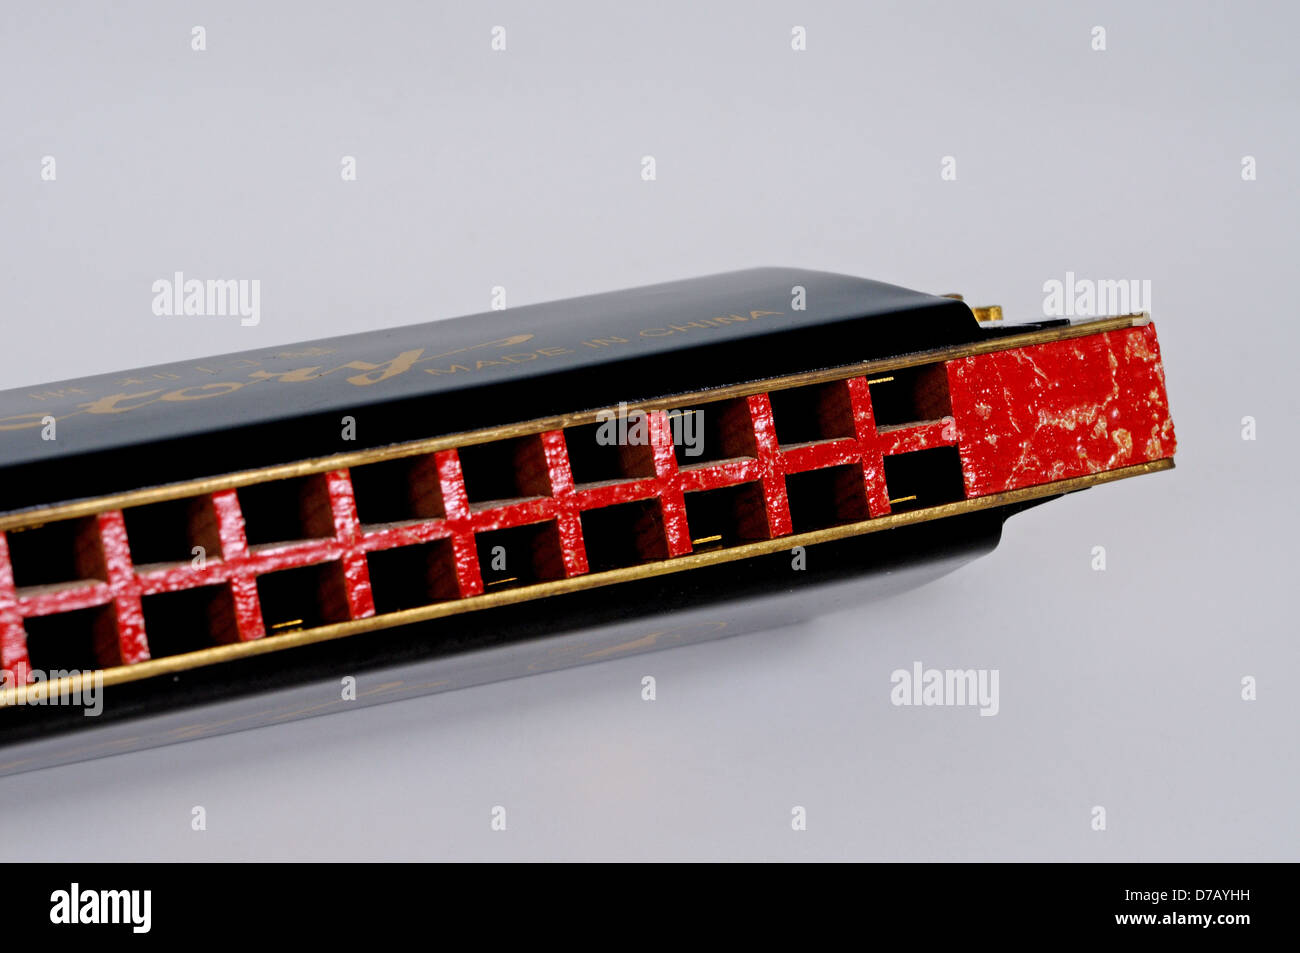 Red and black harmonica against a grey background. Stock Photo